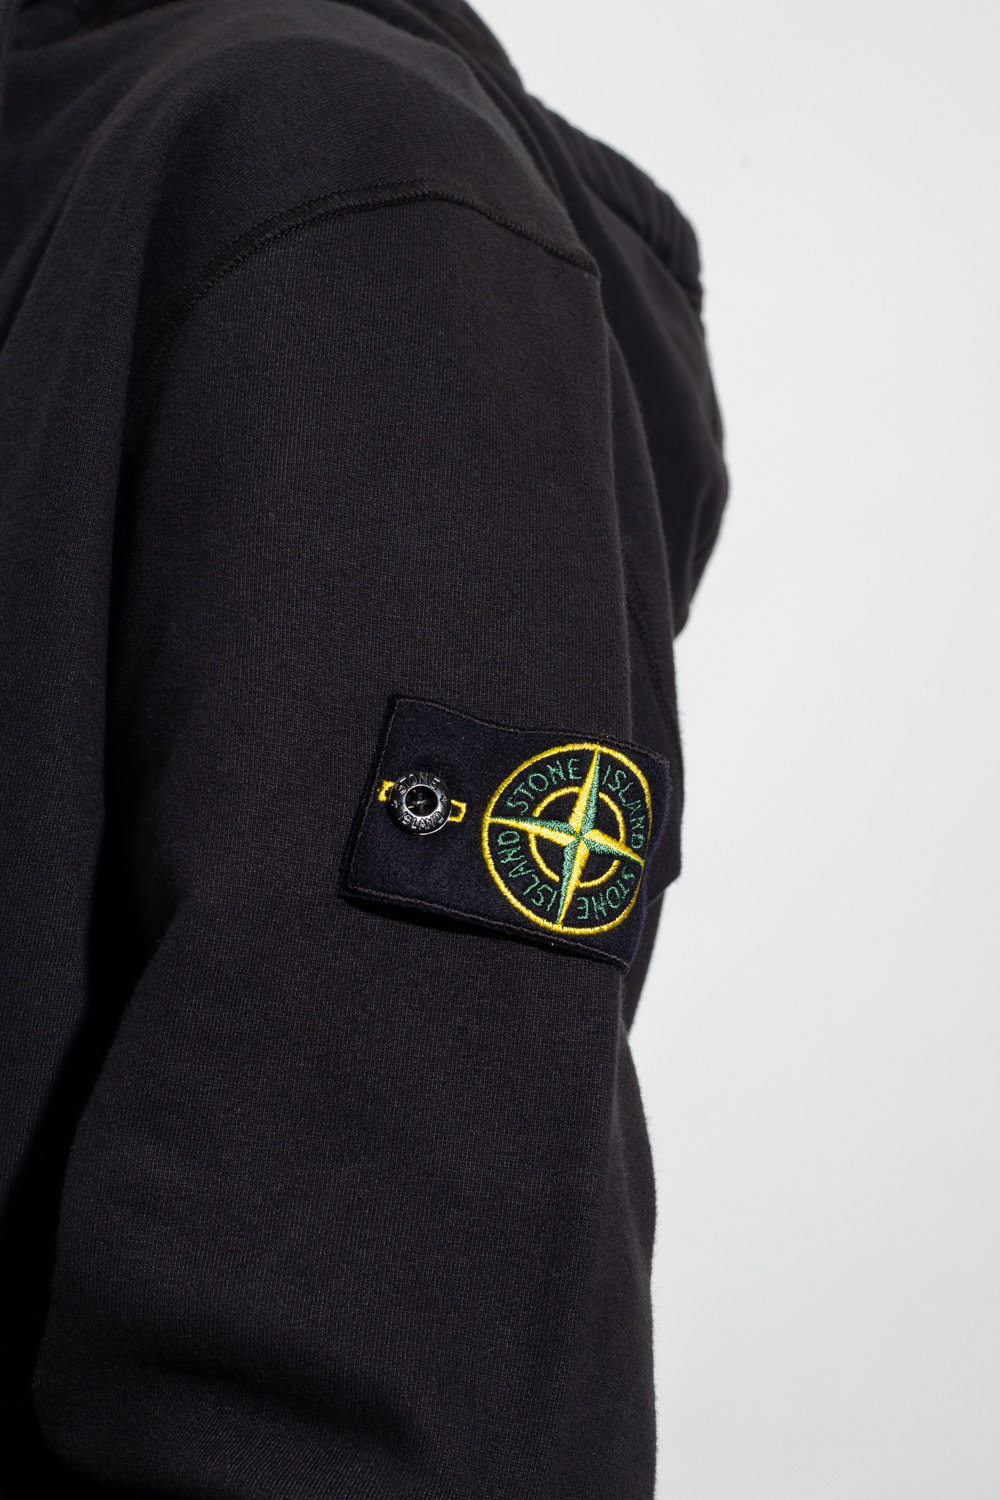 Stone Island feathers hoodie with logo